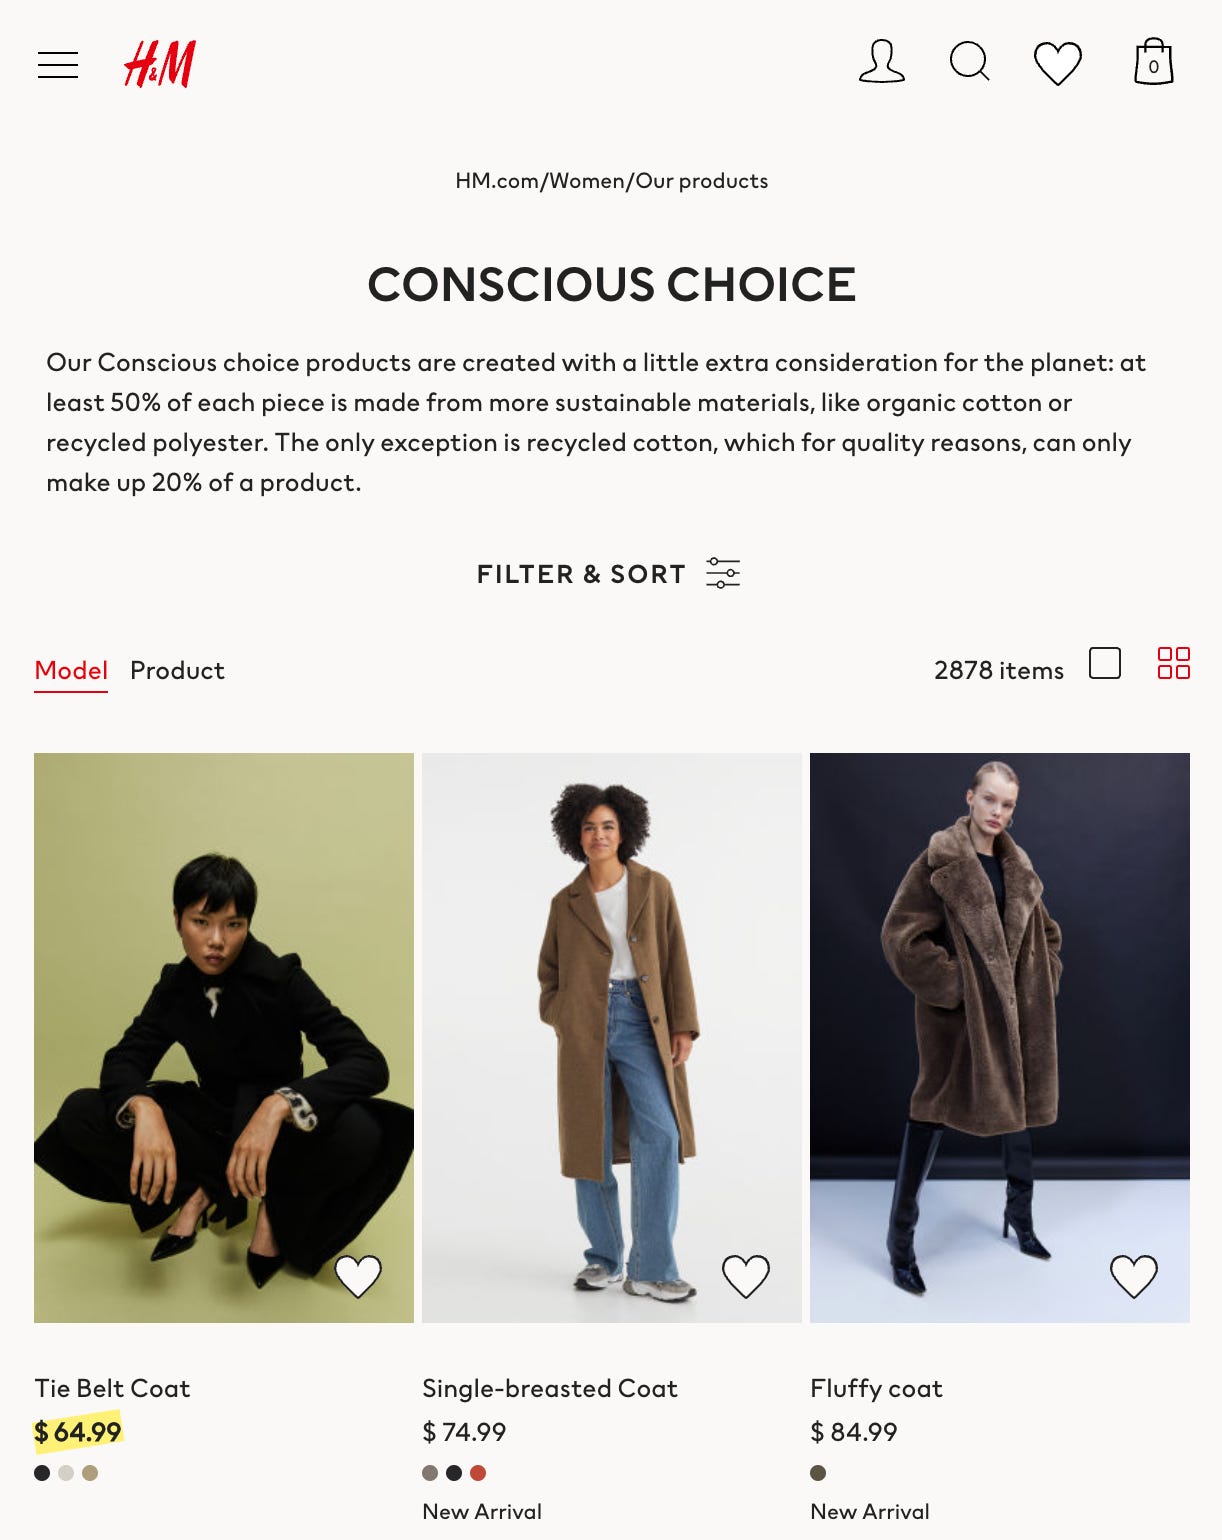 Screenshot of H&M's "Conscious Choice" collection page - featuring products described as "created with a little extra consideration for the planet." The three products shown in the screenshot are long coats, shown on three different tall, thin women.